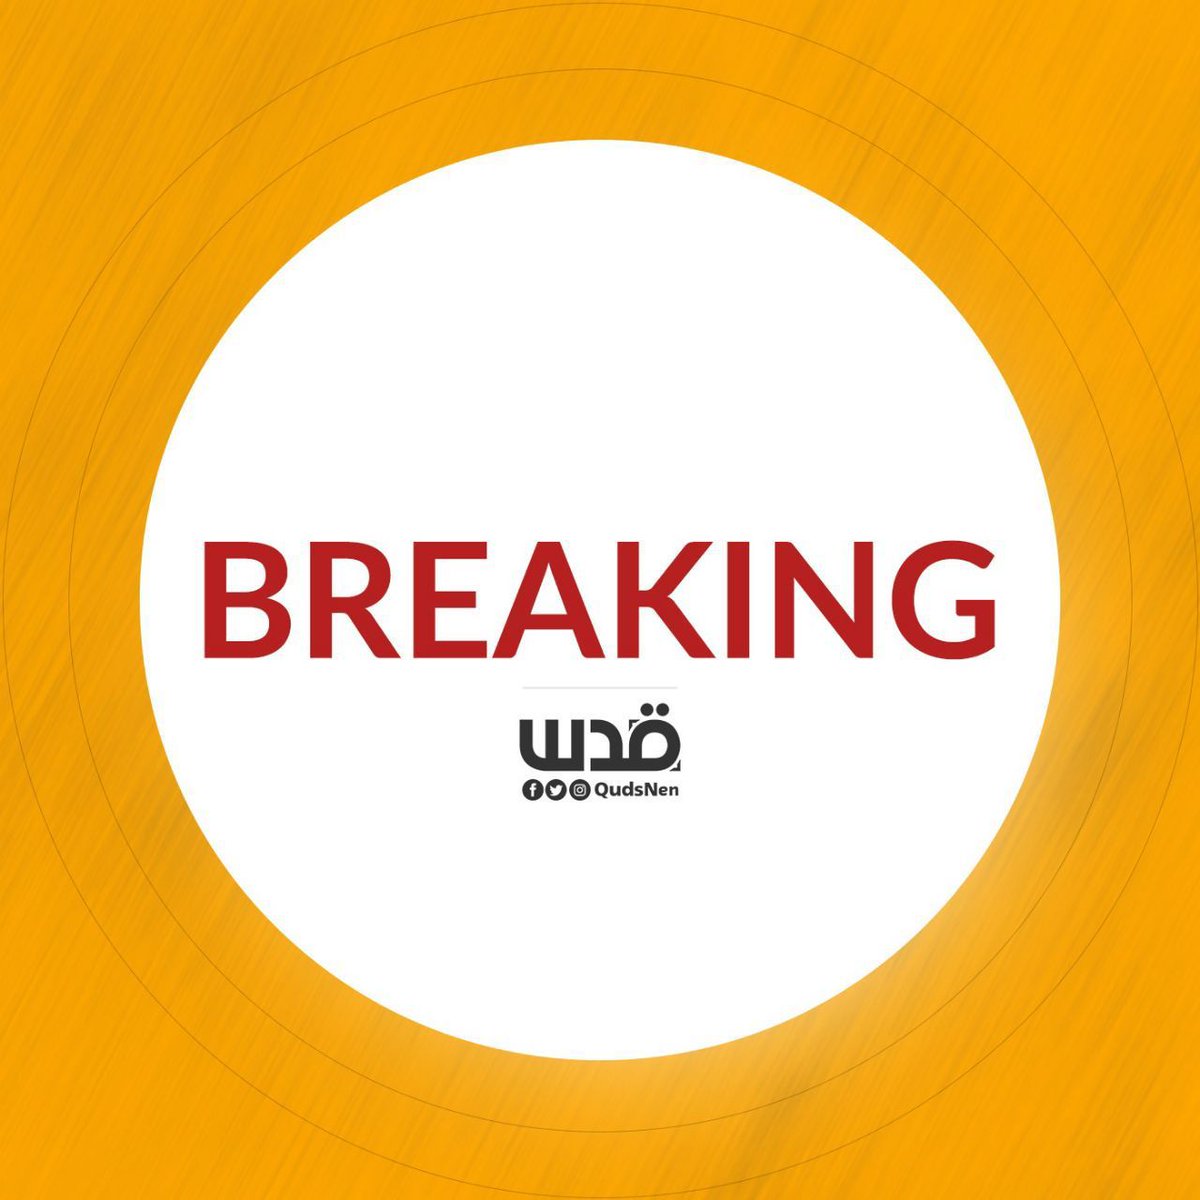 BREAKING: The European Commissioner for Crisis Management says a mission to send aid to Gaza has been cancelled due to Israel’s attack on Rafah and the closure of the border crossings.